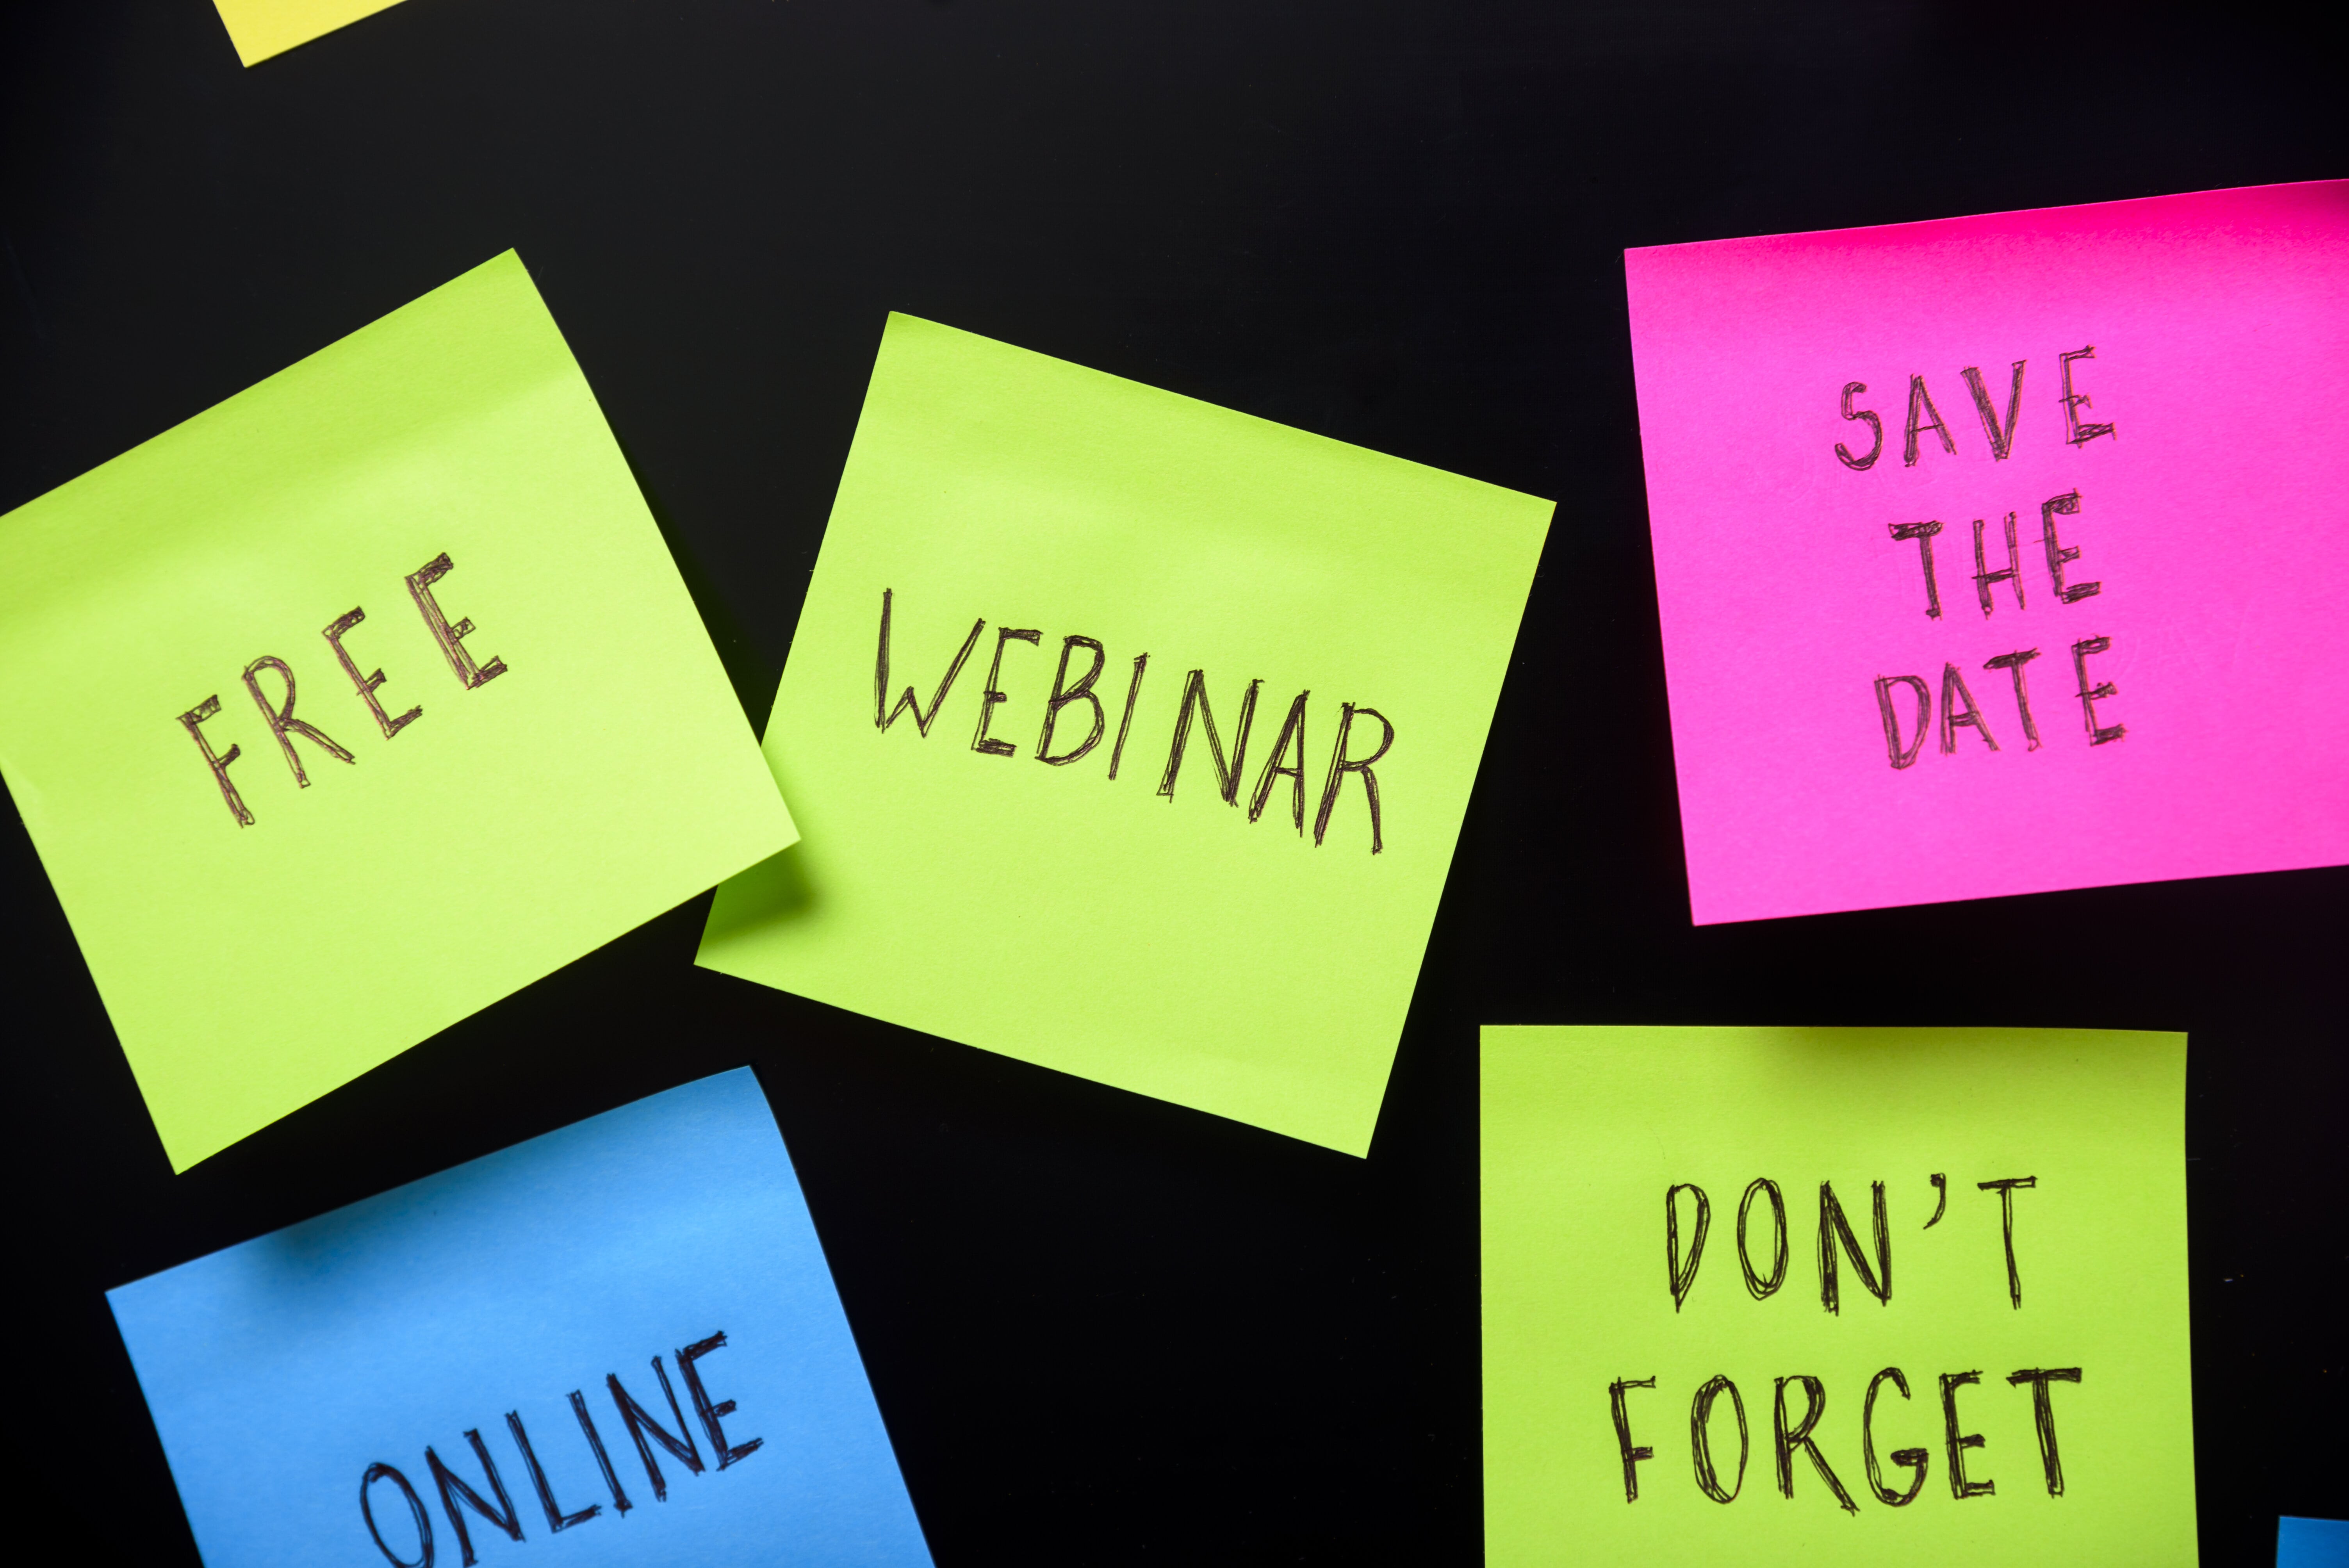 Post it notes saying free webinar, don't forget, save the date